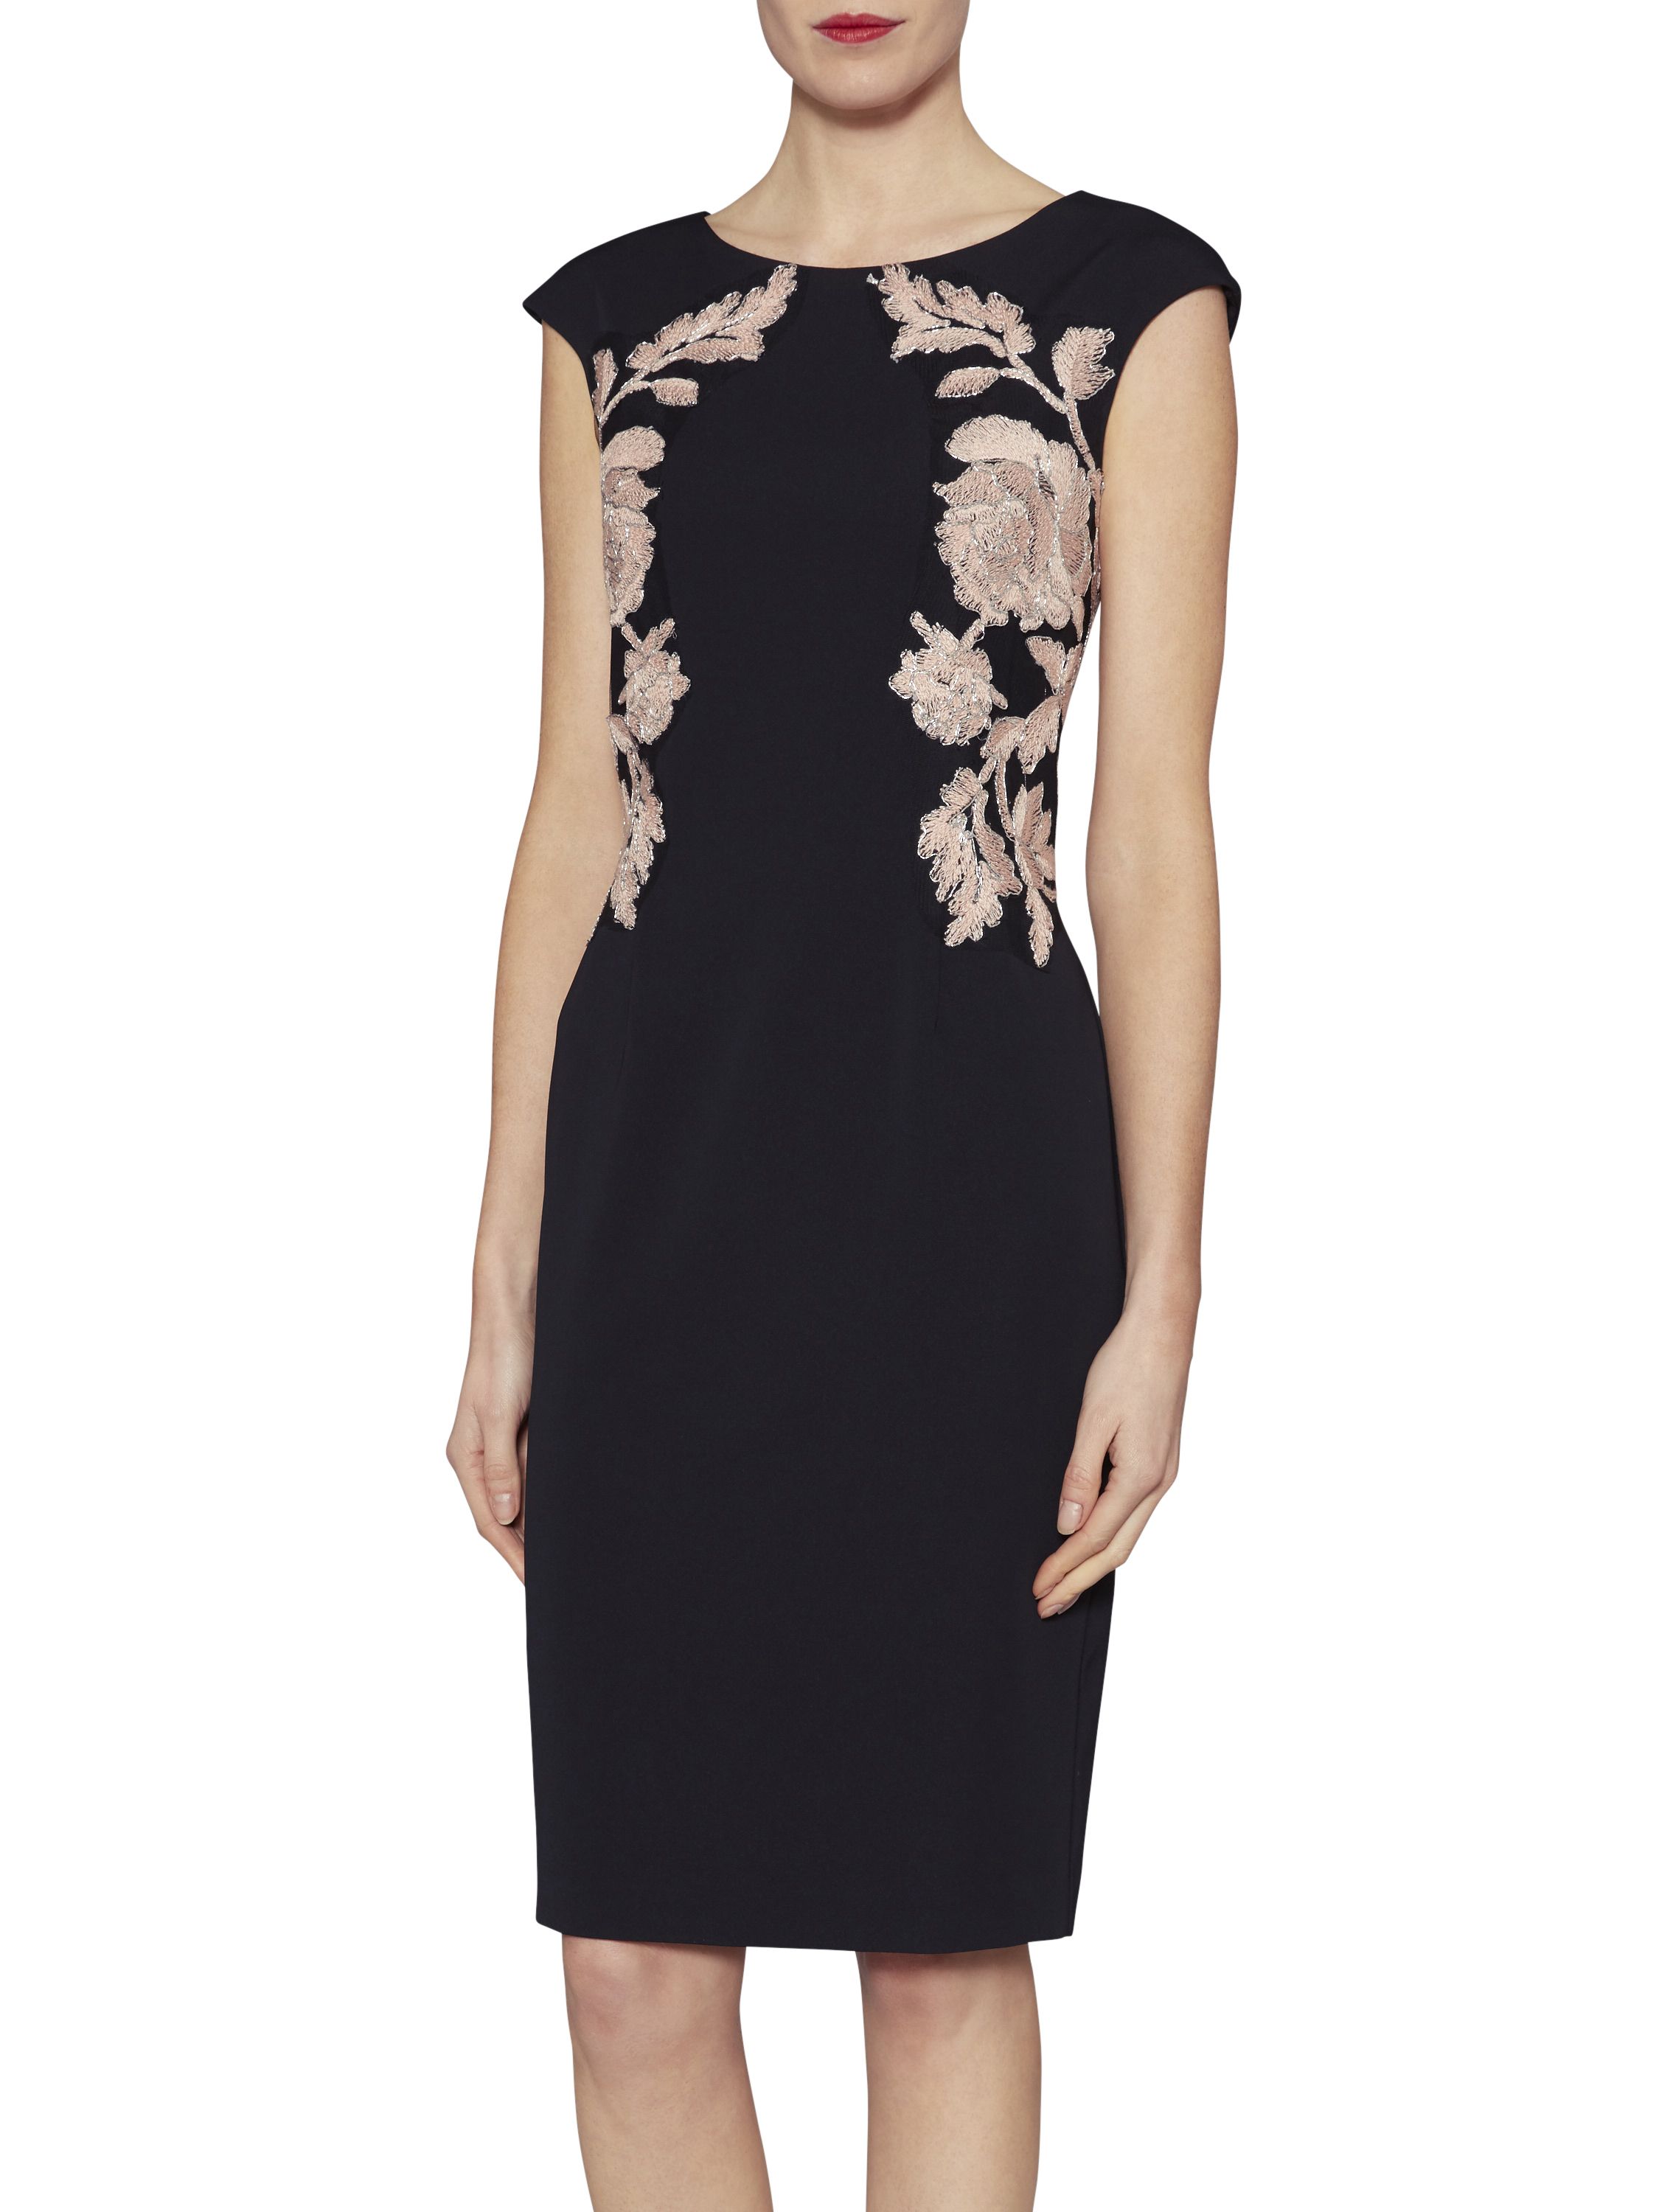 This elegant embroidered dress by Gina Bacconi will make you feel fabulous. Both sides of the dress have been embroidered with a beautiful symmetrical floral design. The dress is fully lined and fastens with a concealed back zip. It has back split for added class.